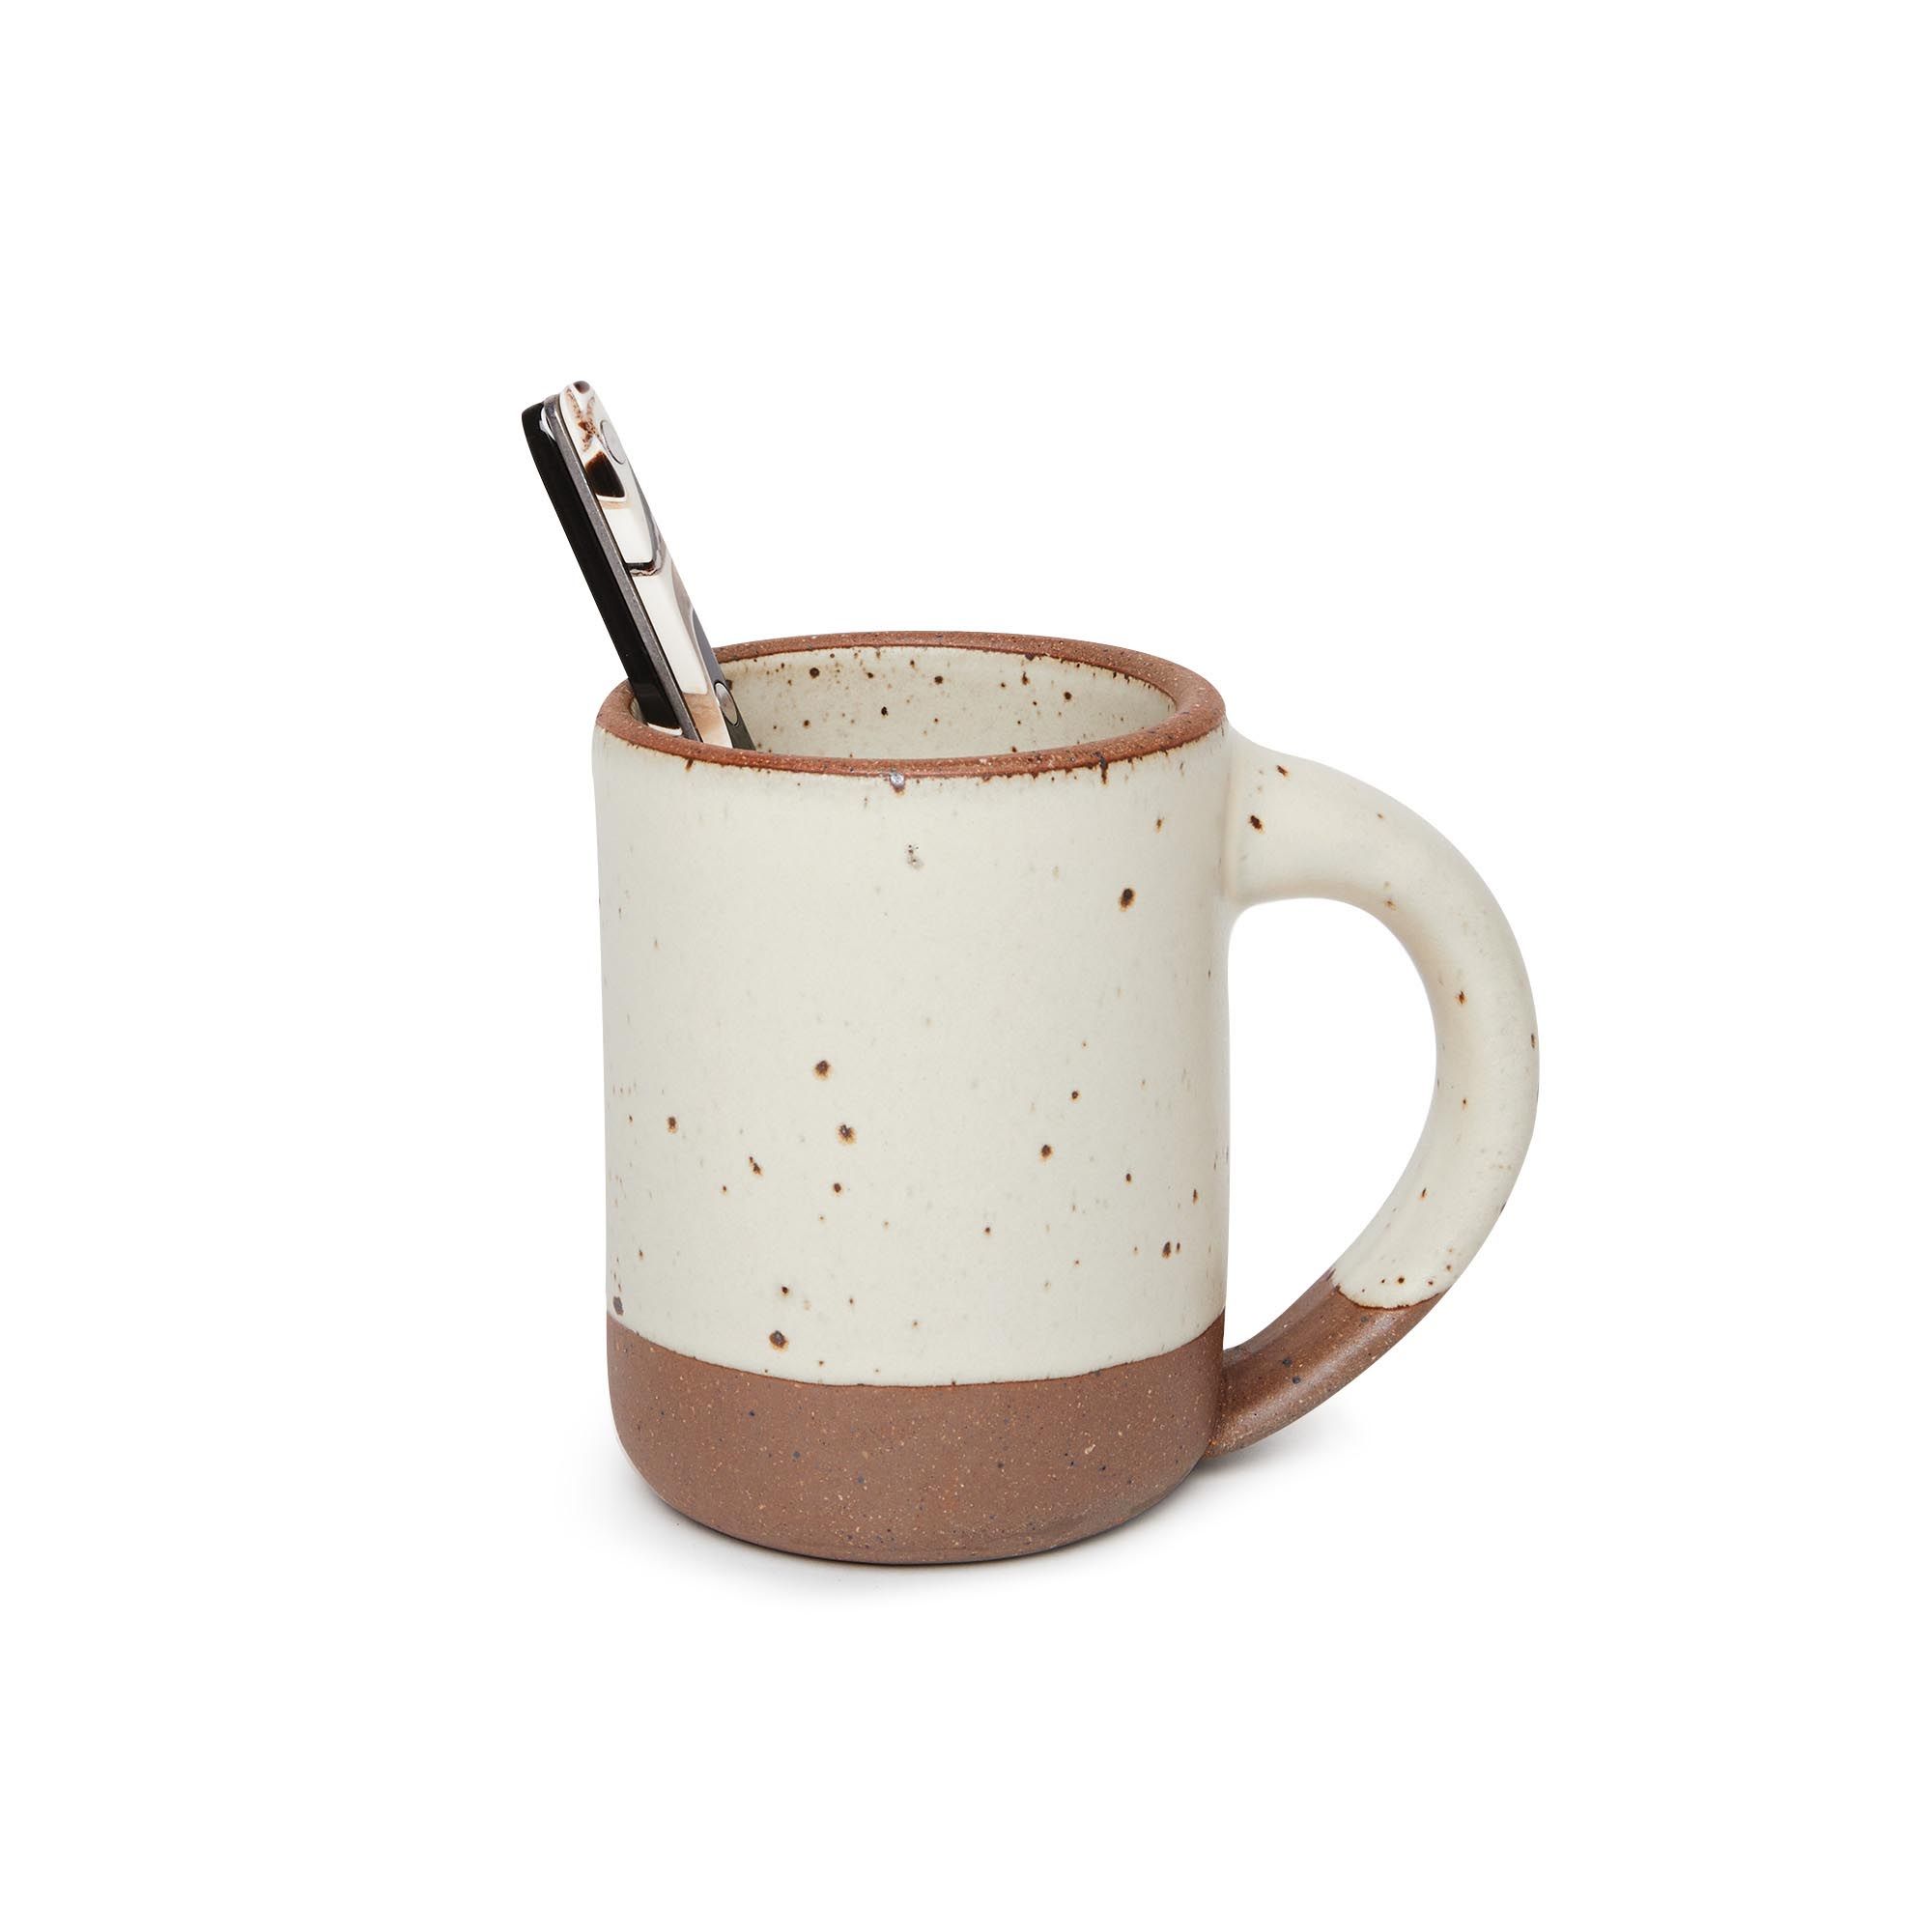 A spoon inside a medium sized ceramic mug with handle in a warm, tan-toned, off-white color featuring iron speckles and unglazed rim and bottom base.